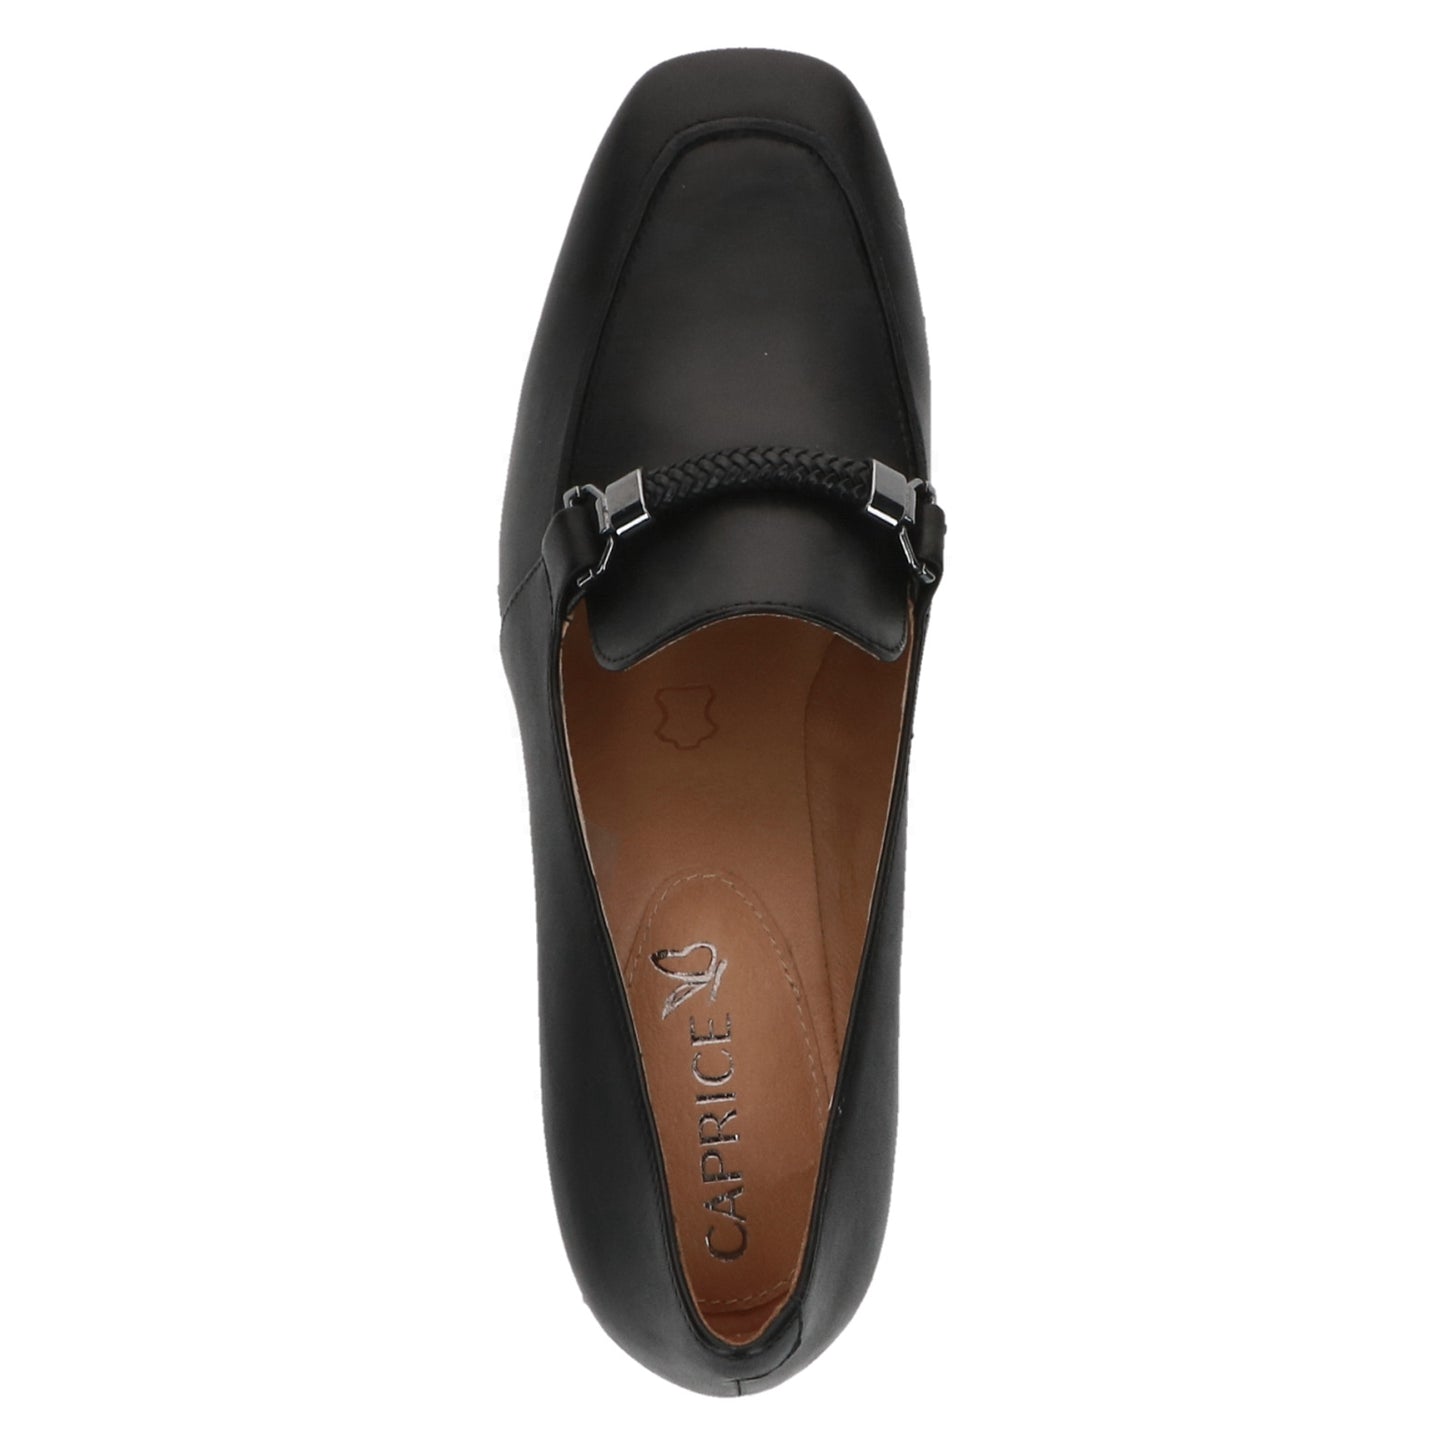 Caprice 9-24401-41 022 Black Casual Shoes